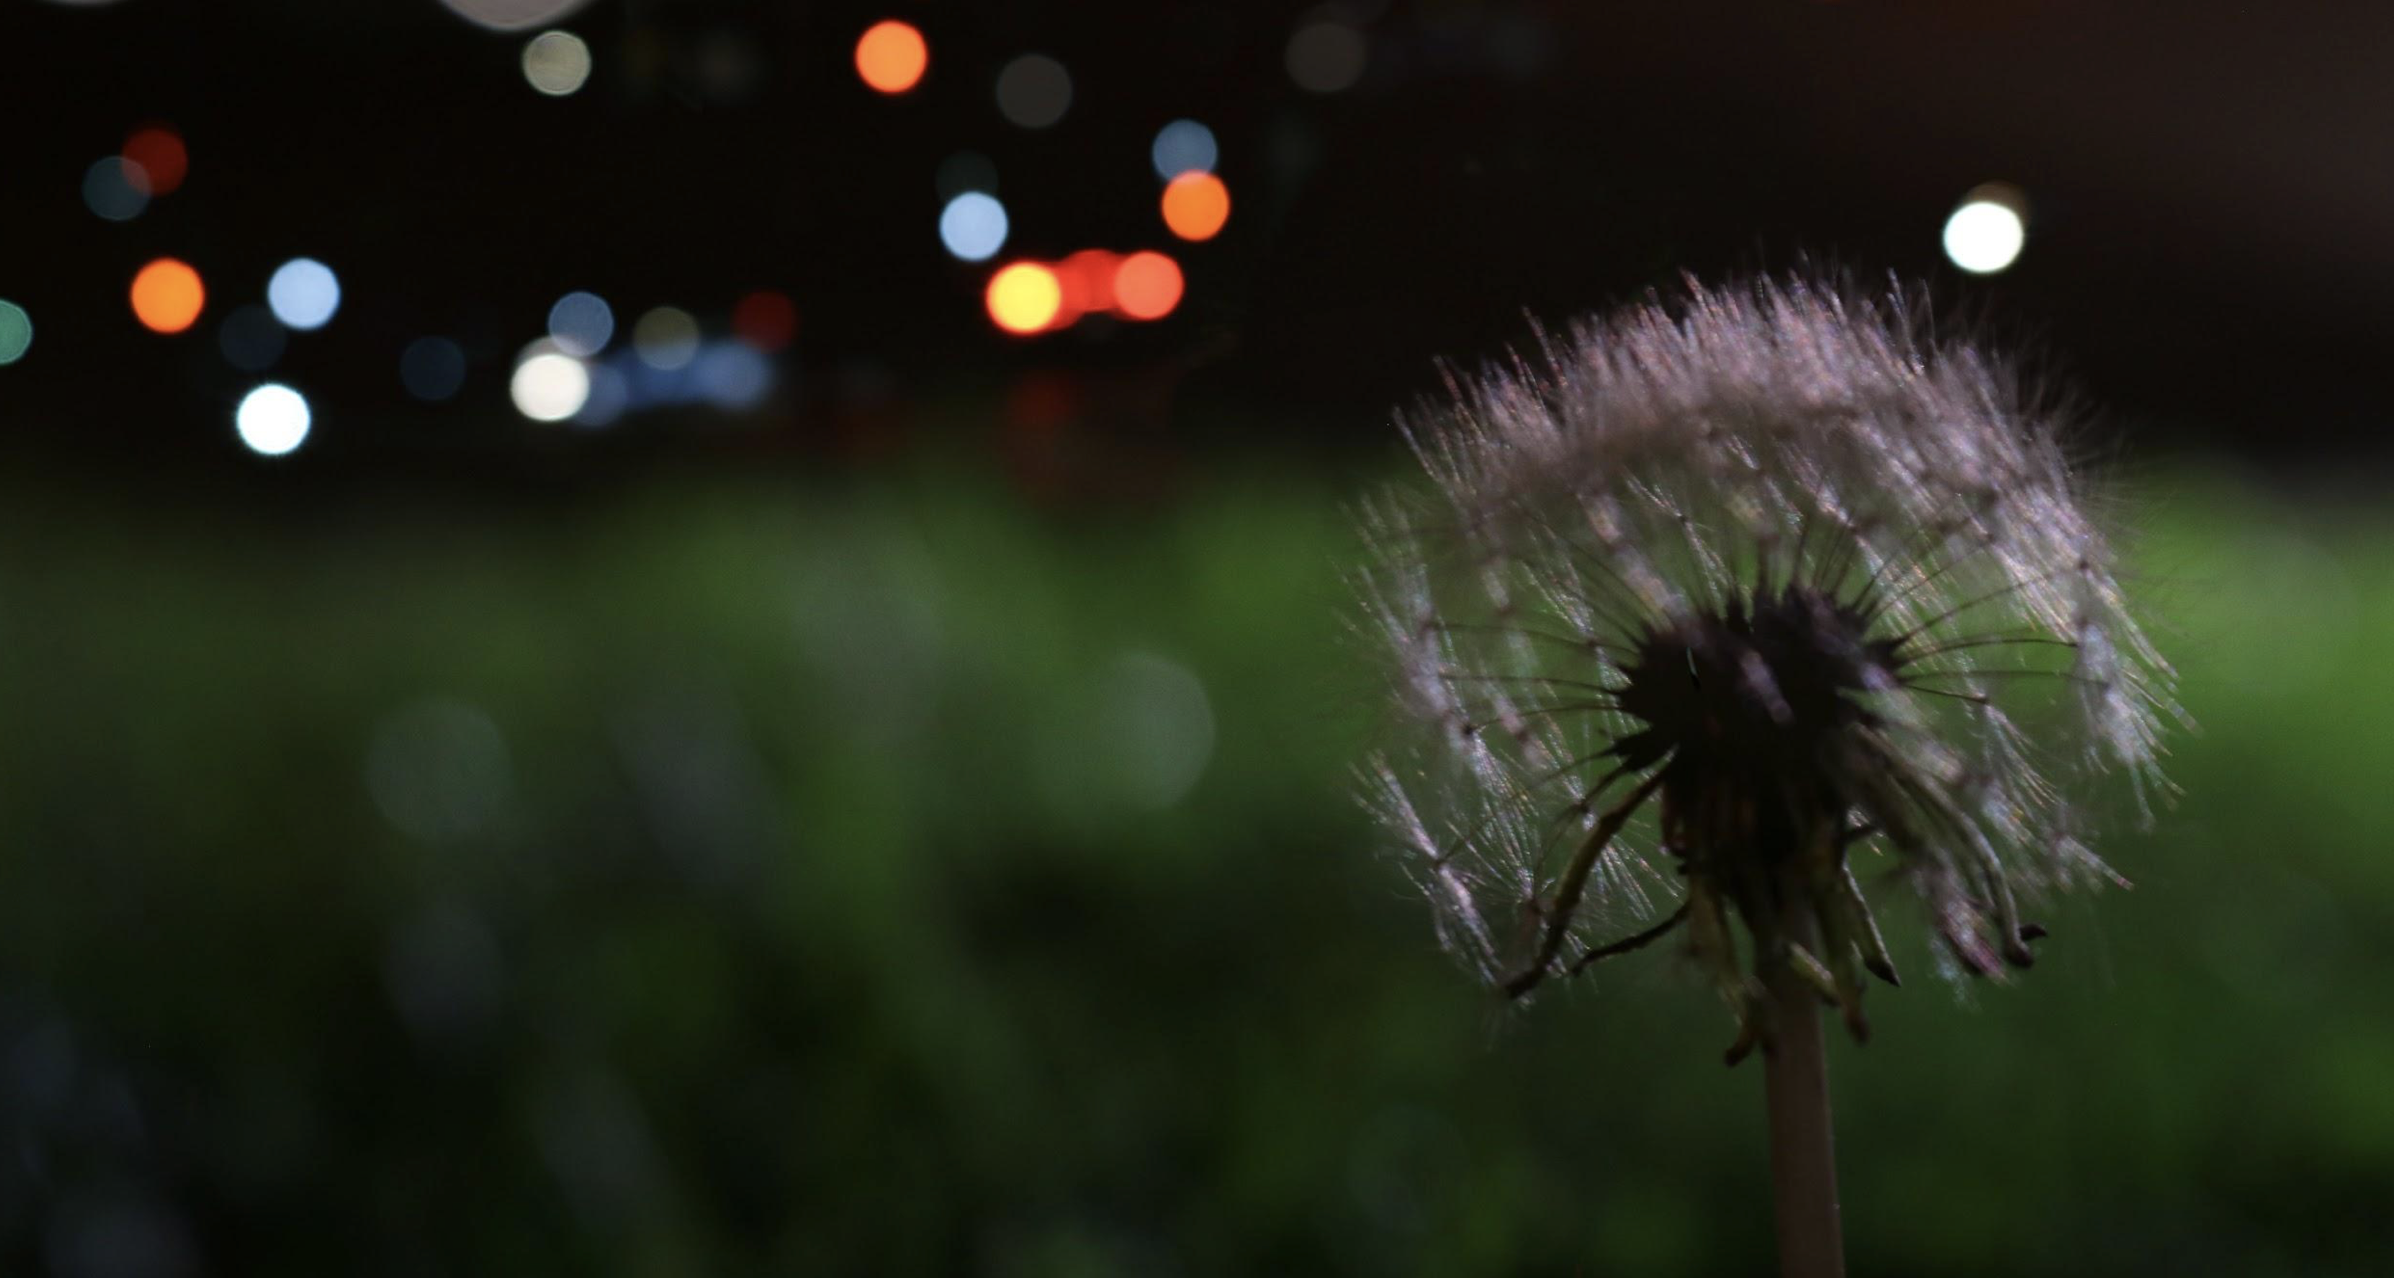 A close-up of a dandelion at night with a green field in the background.